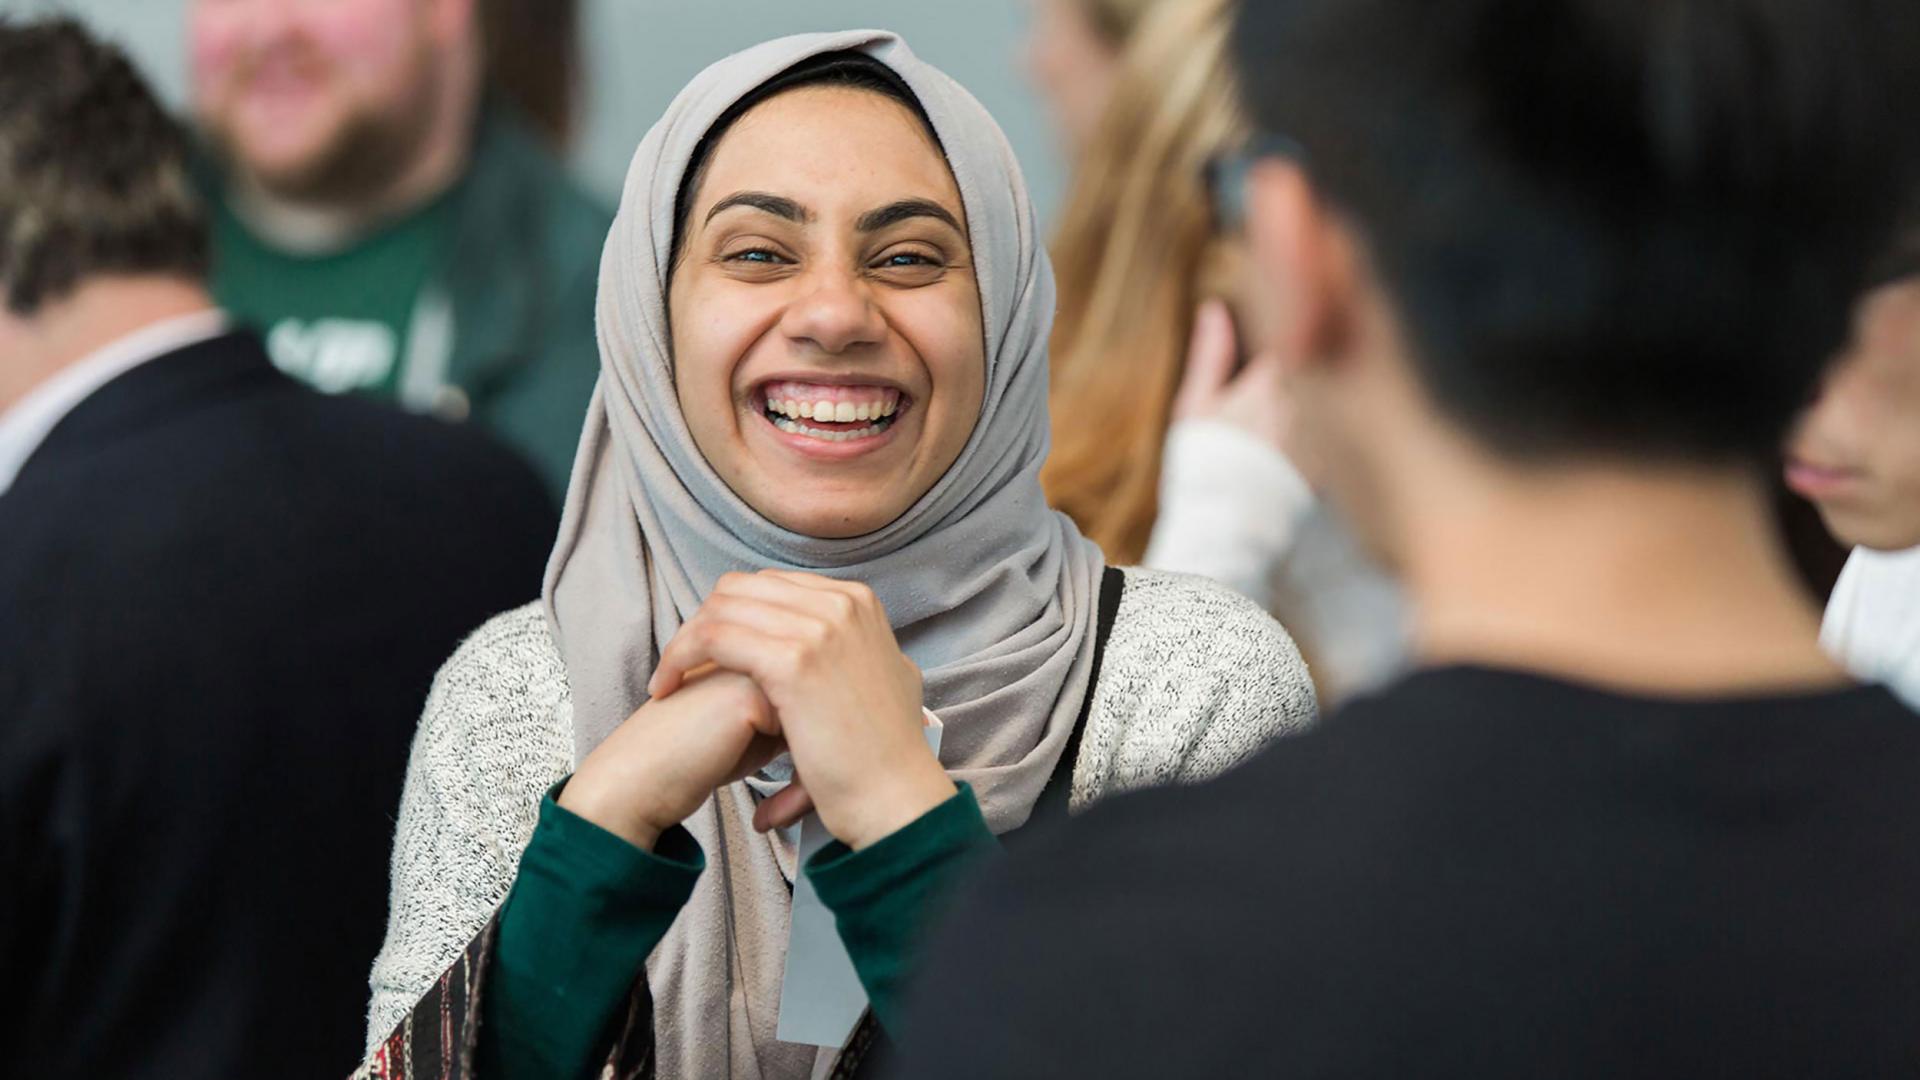 A woman in a head scarf smiling brightly